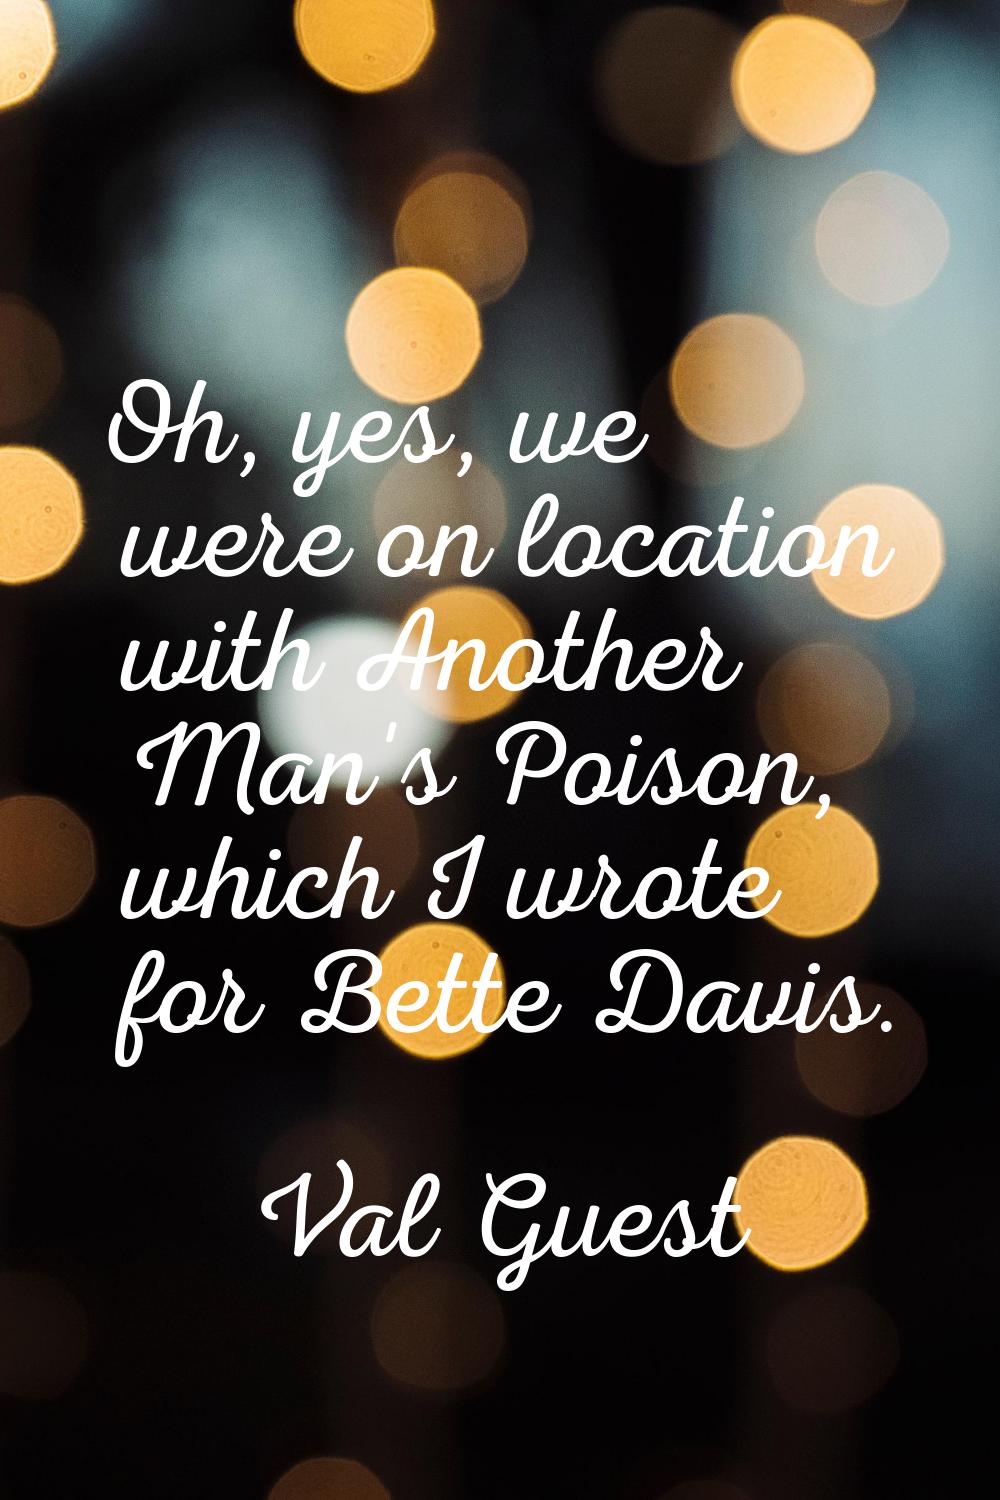 Oh, yes, we were on location with Another Man's Poison, which I wrote for Bette Davis.